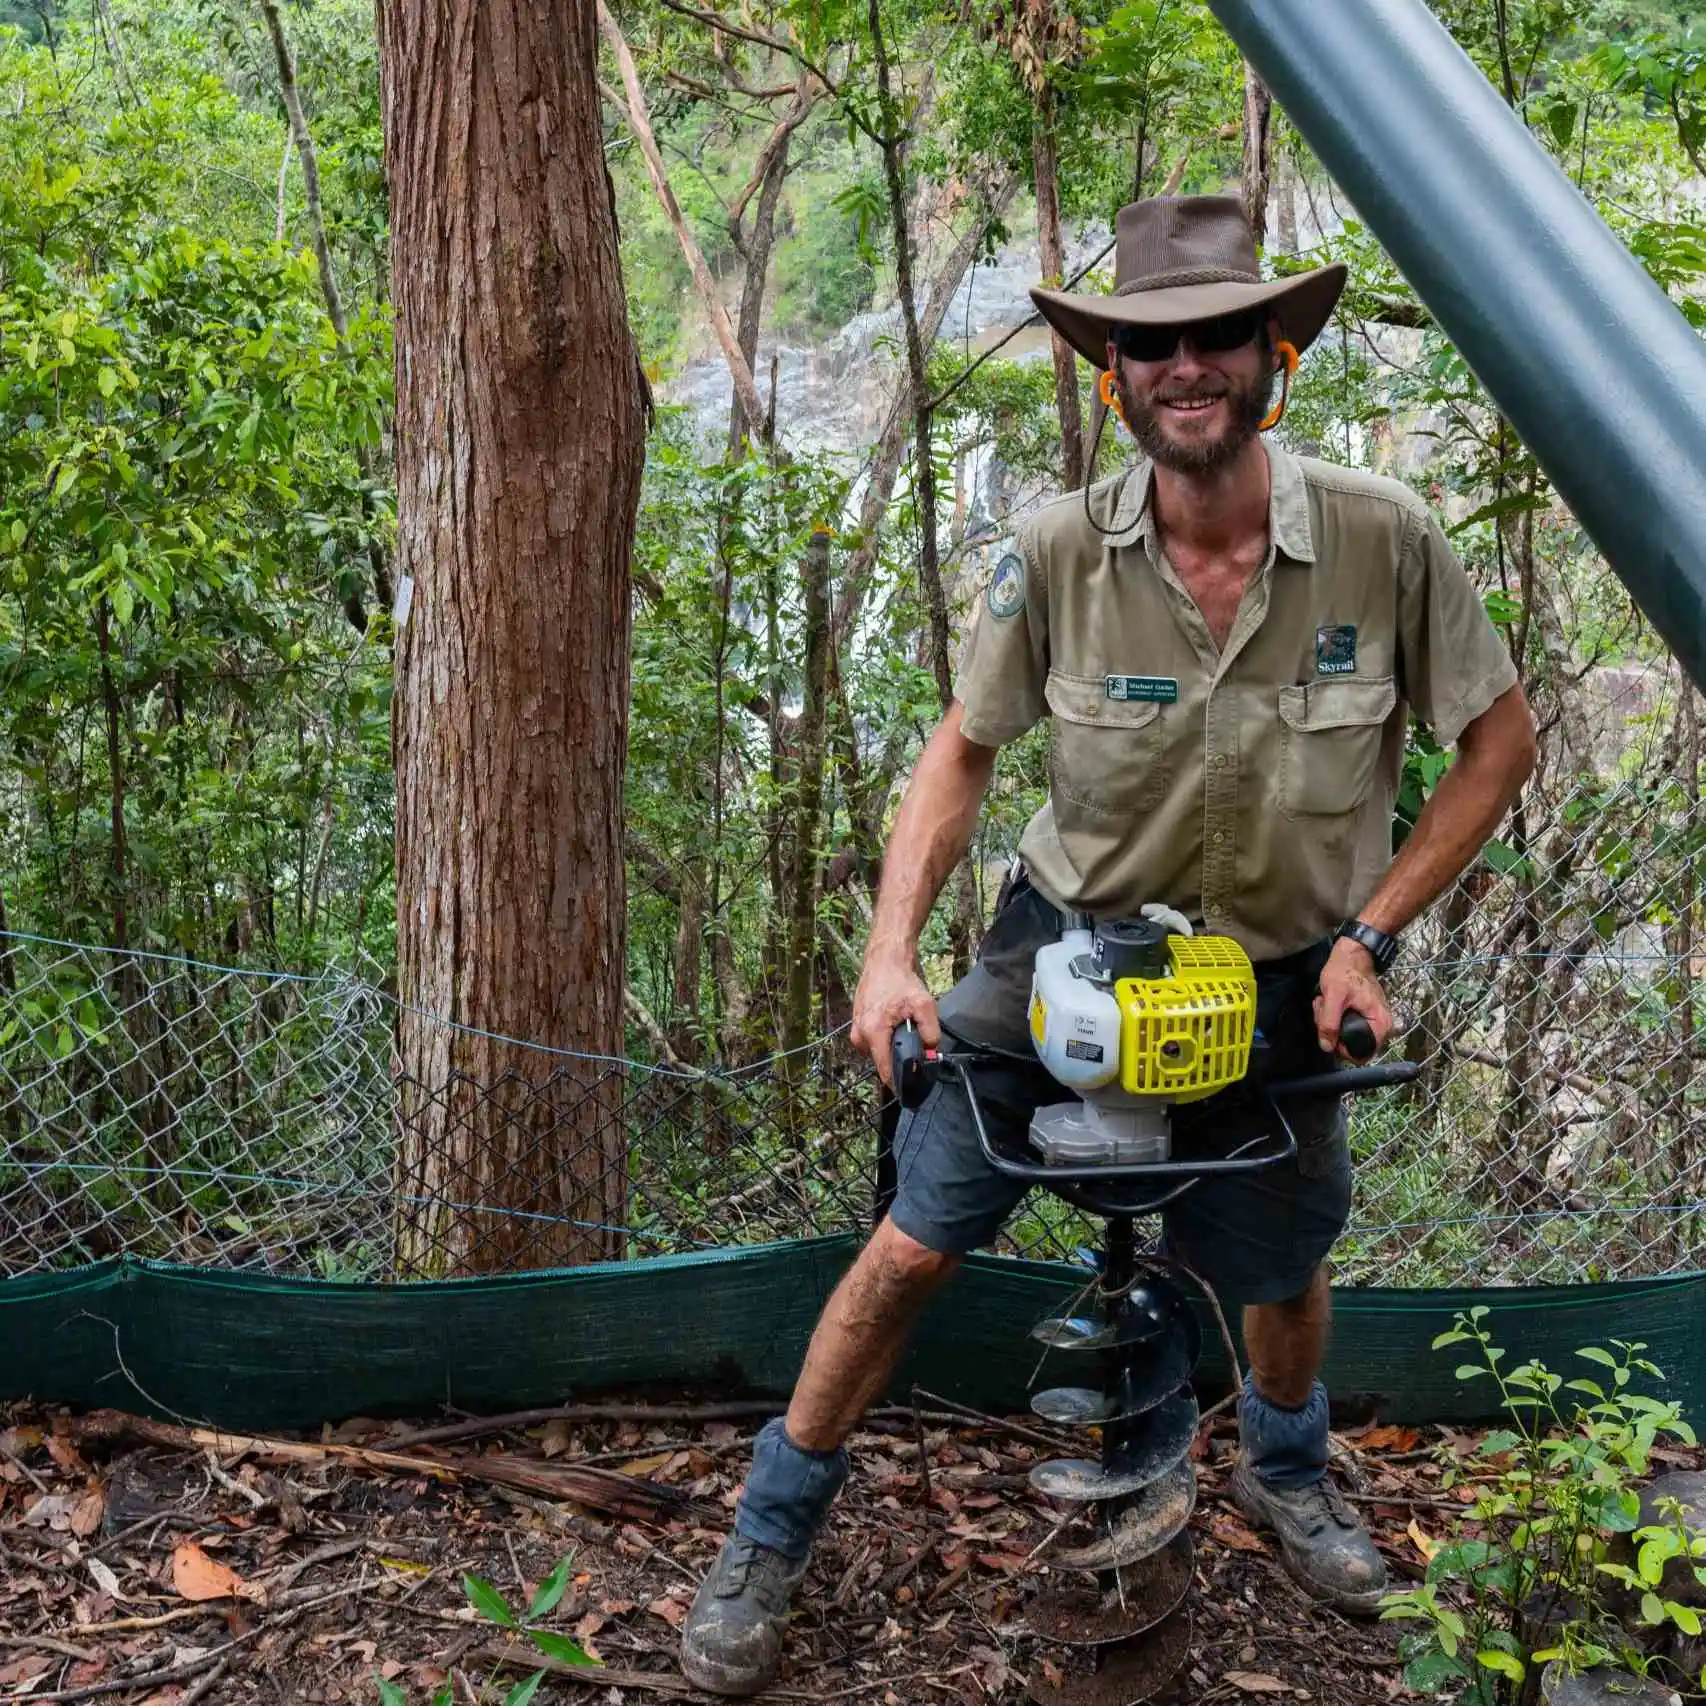 A Skyrail Ranger uses a machine to dig holes for revegetation of the rainofrest